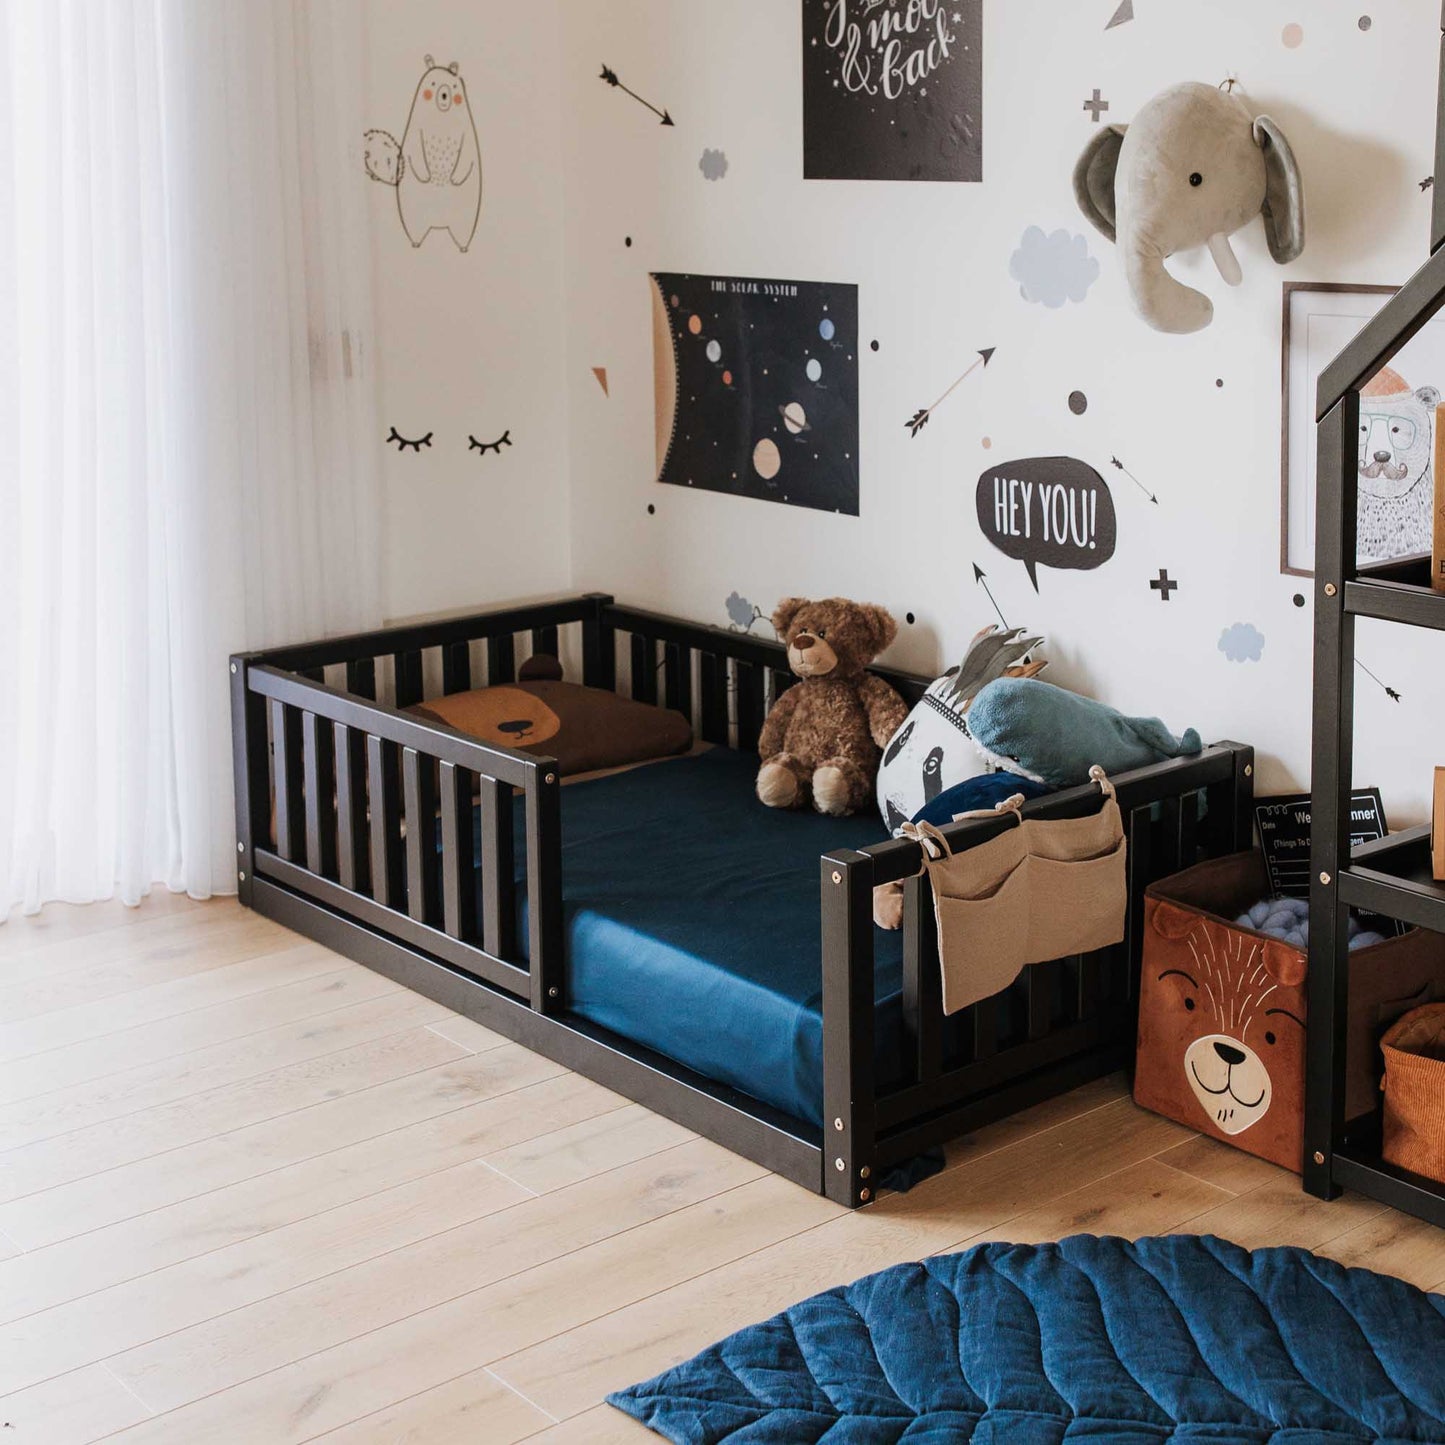 A child's room with a Montessori kids' bed with a fence adorned with teddy bears and stuffed animals, providing security and promoting independent sleeping. (Brand: Sweet Home From Wood)